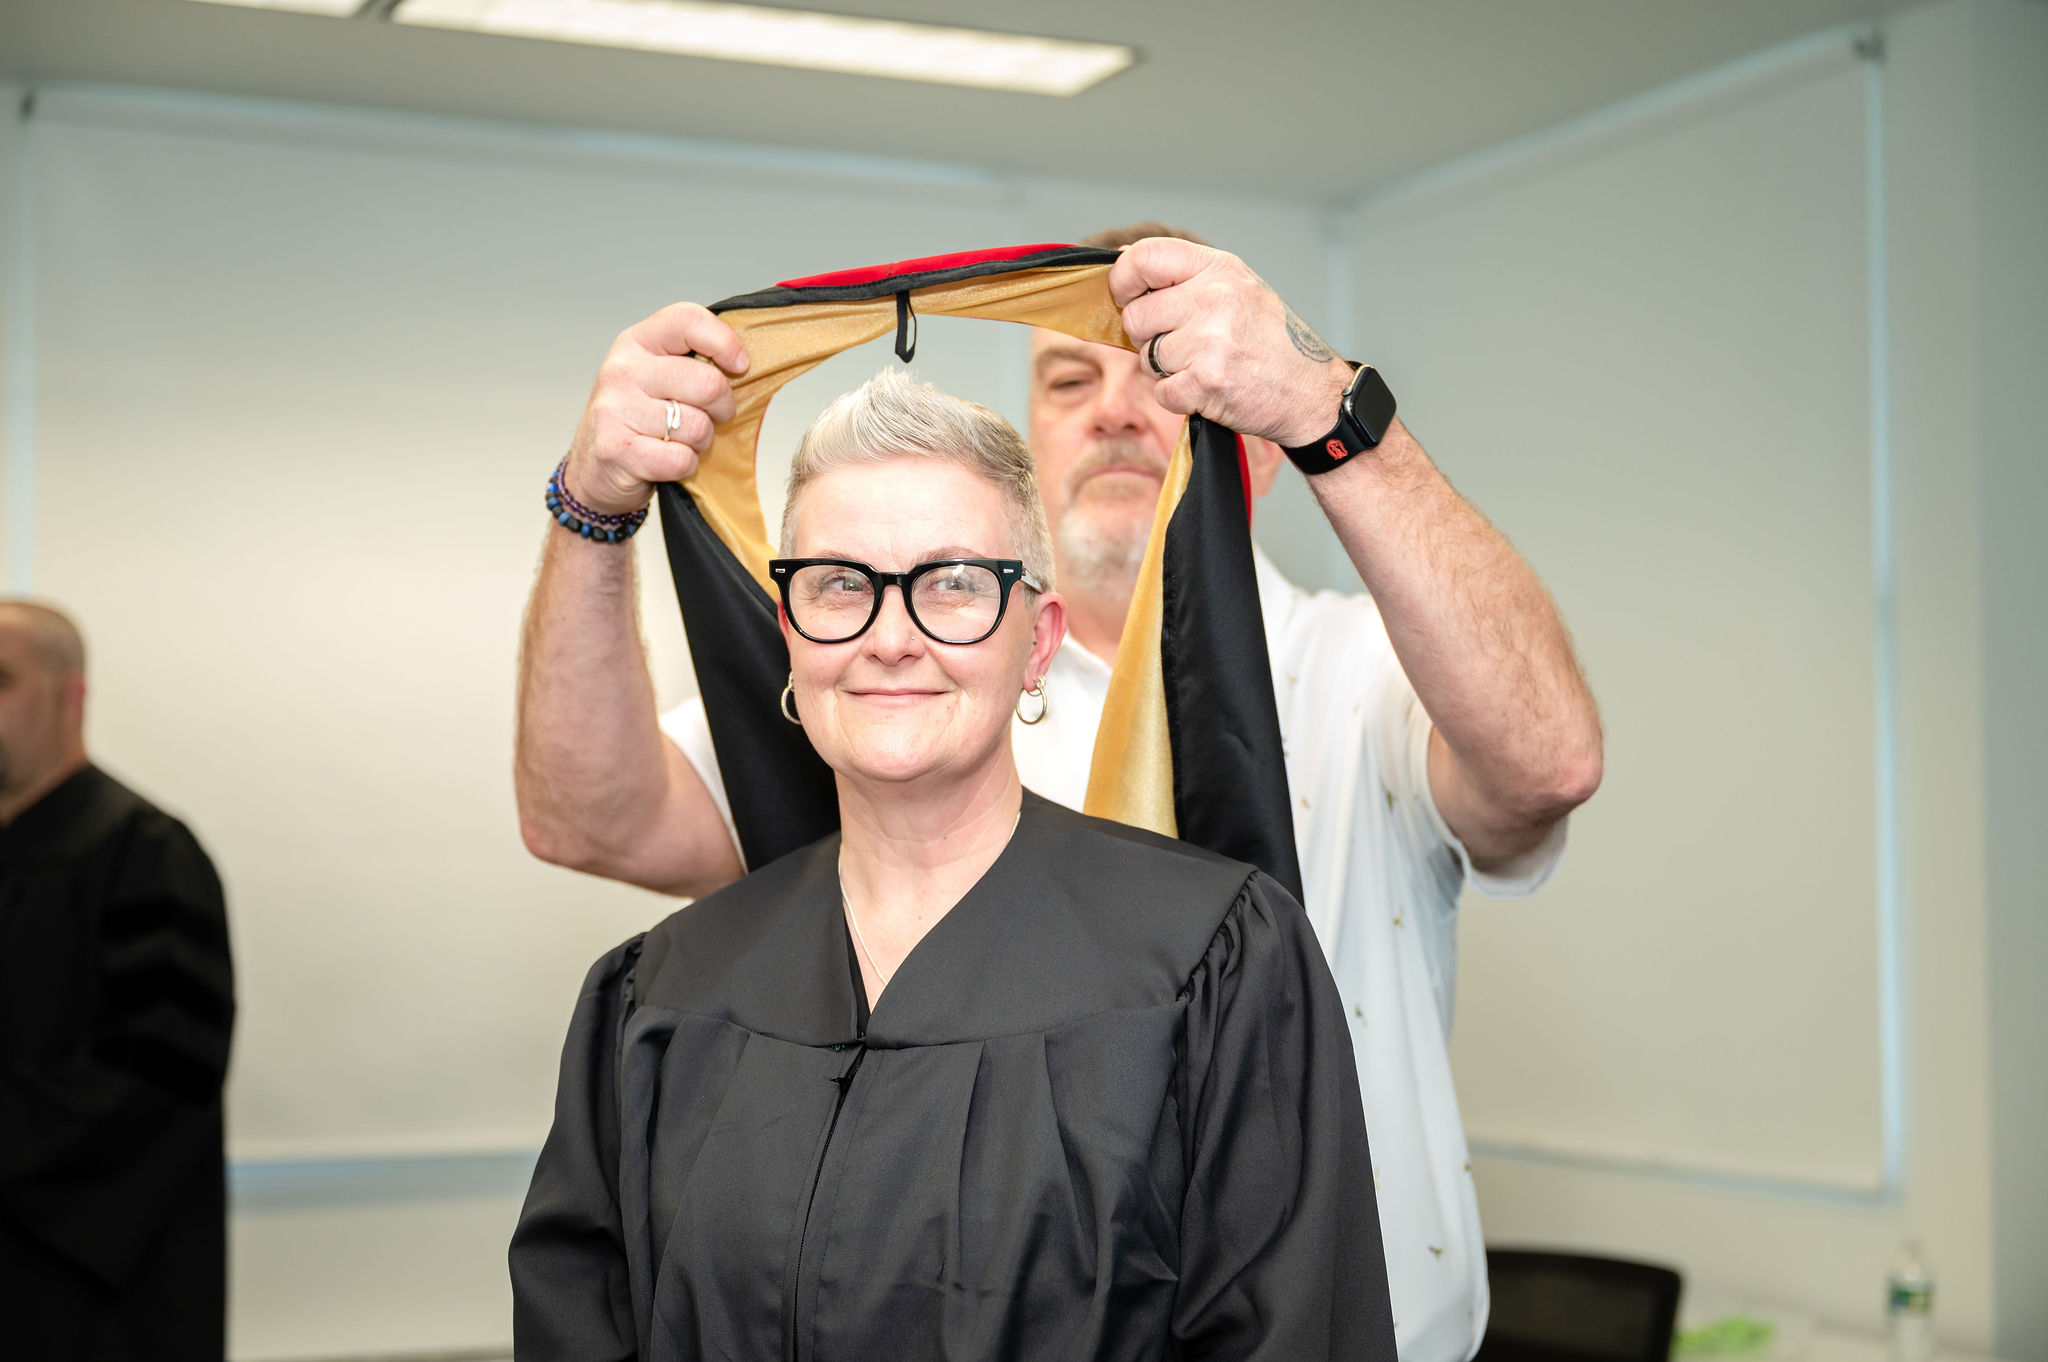 Woman getting hooded